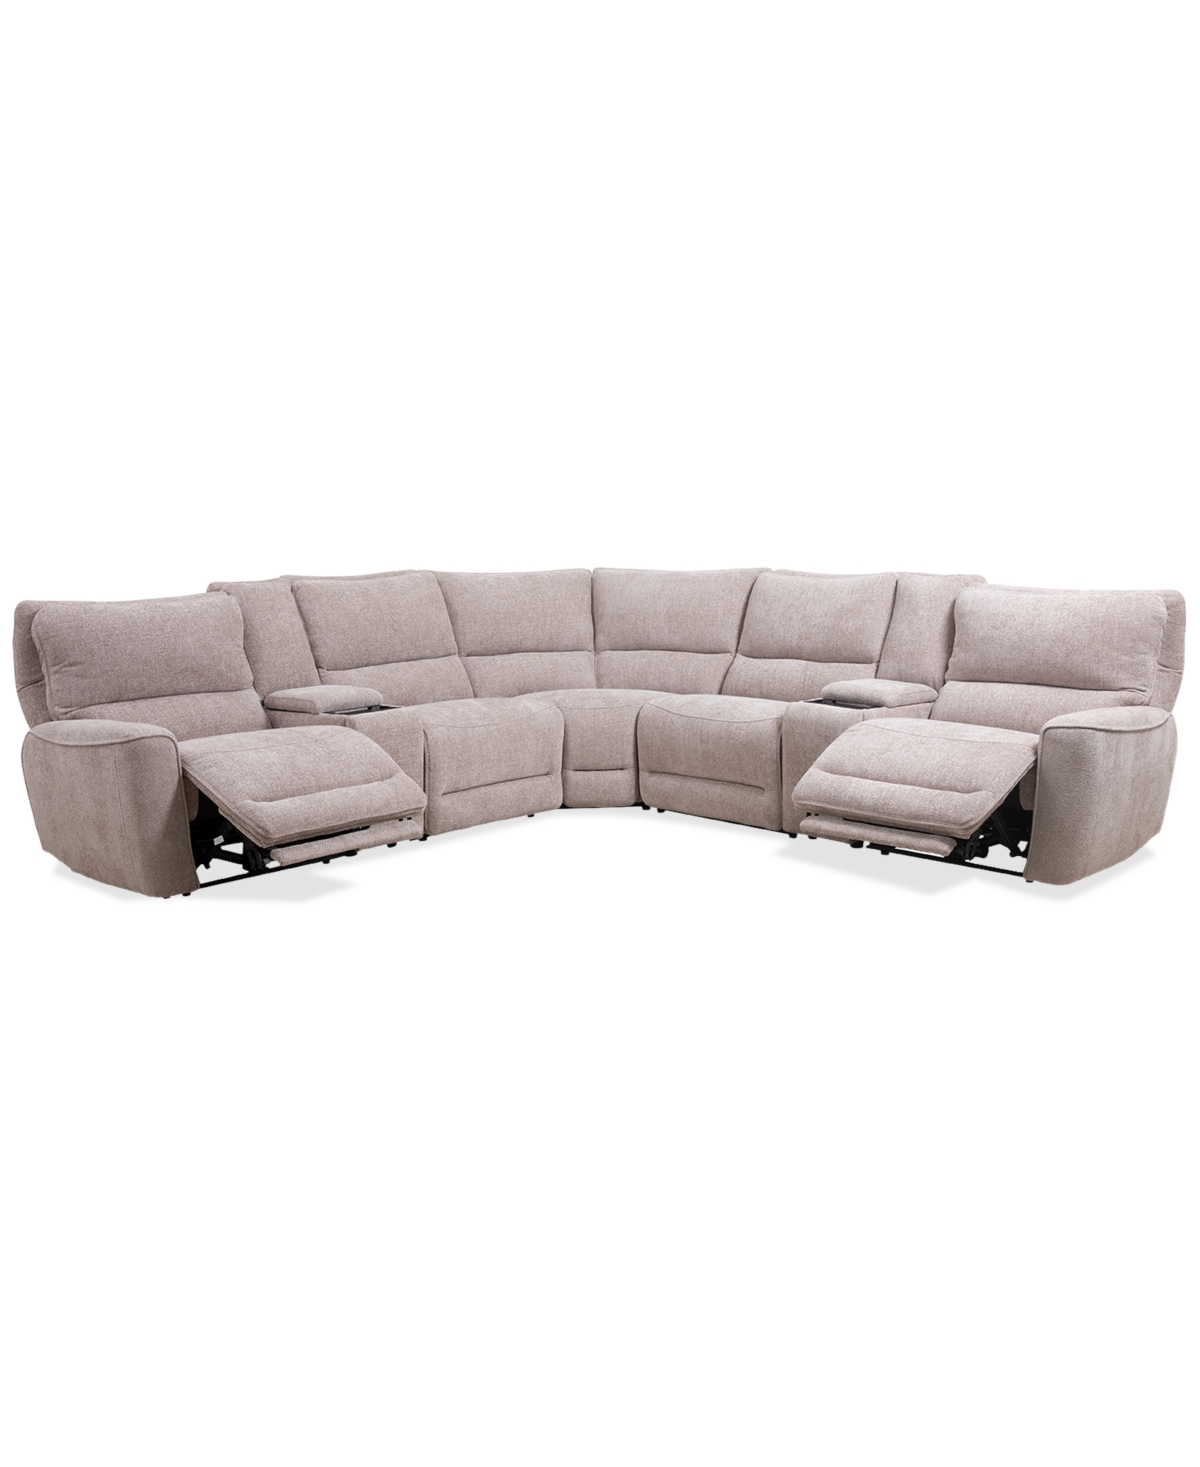 Macy's Deklyn 129" 7-pc. Zero Gravity Fabric Sectional With 2 Power Recliners & 2 Consoles, Created For Mac In Cobblestone